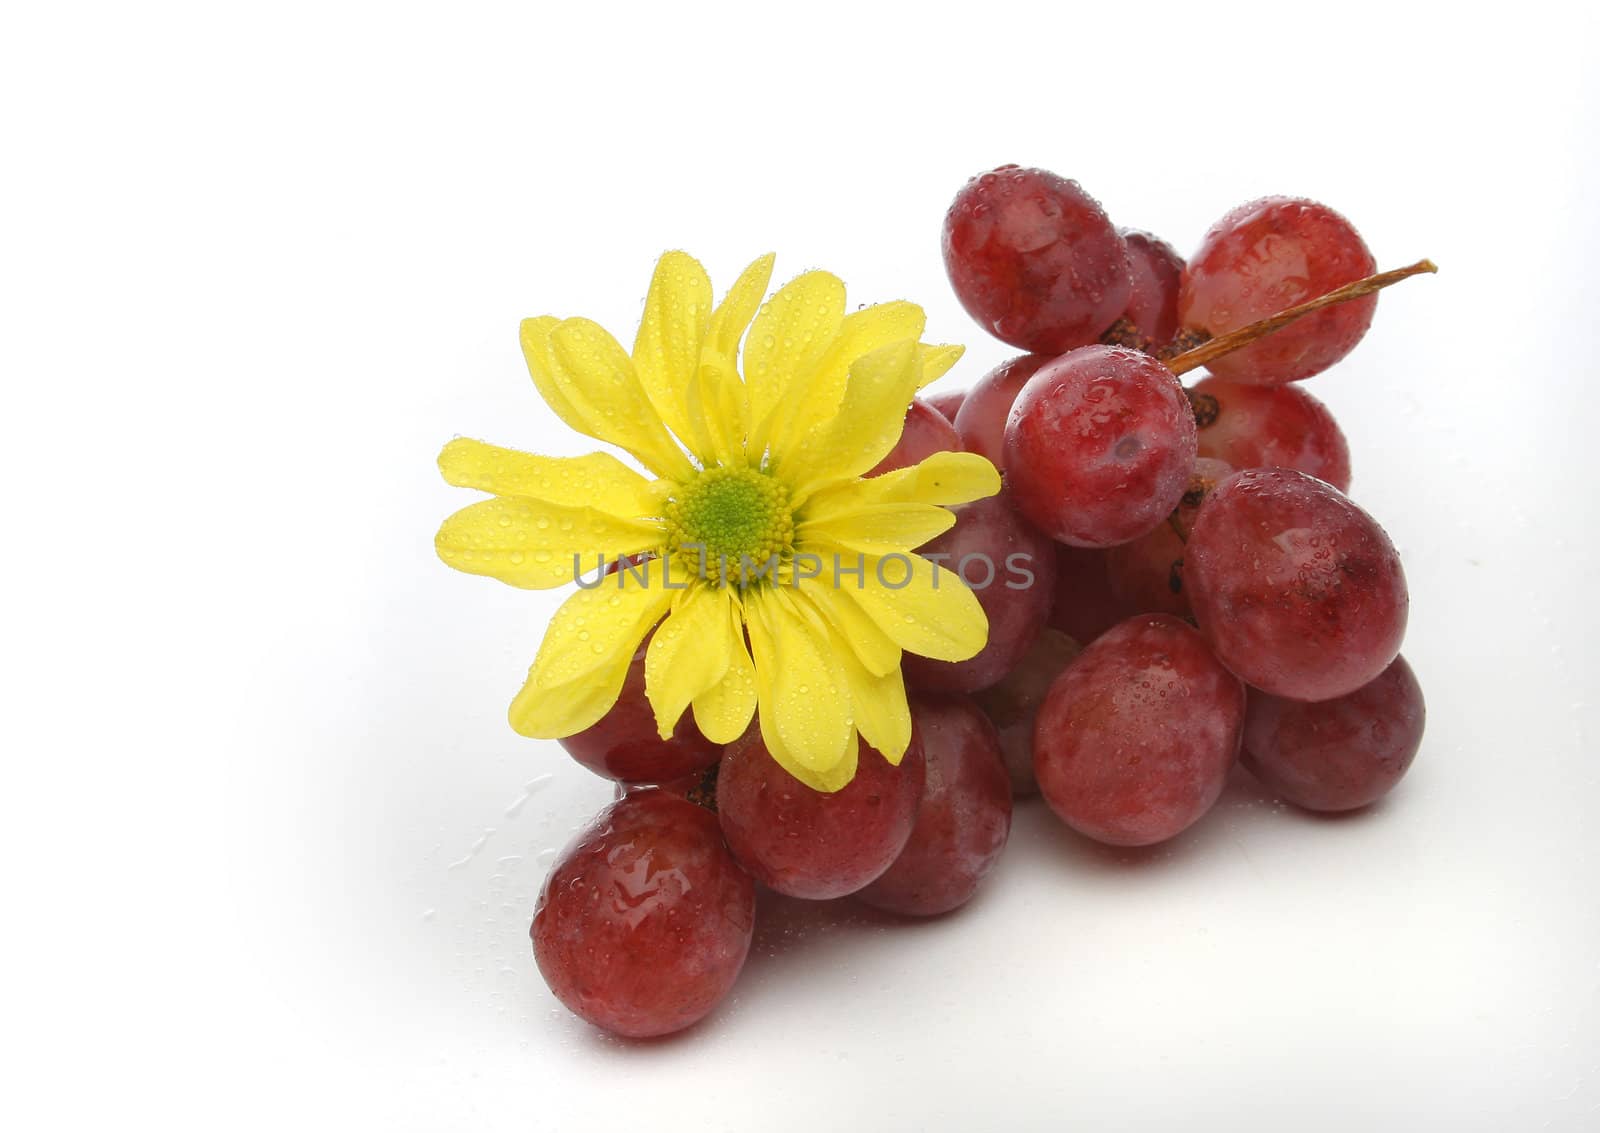 Bunch of grapes with a yellow flower by Erdosain